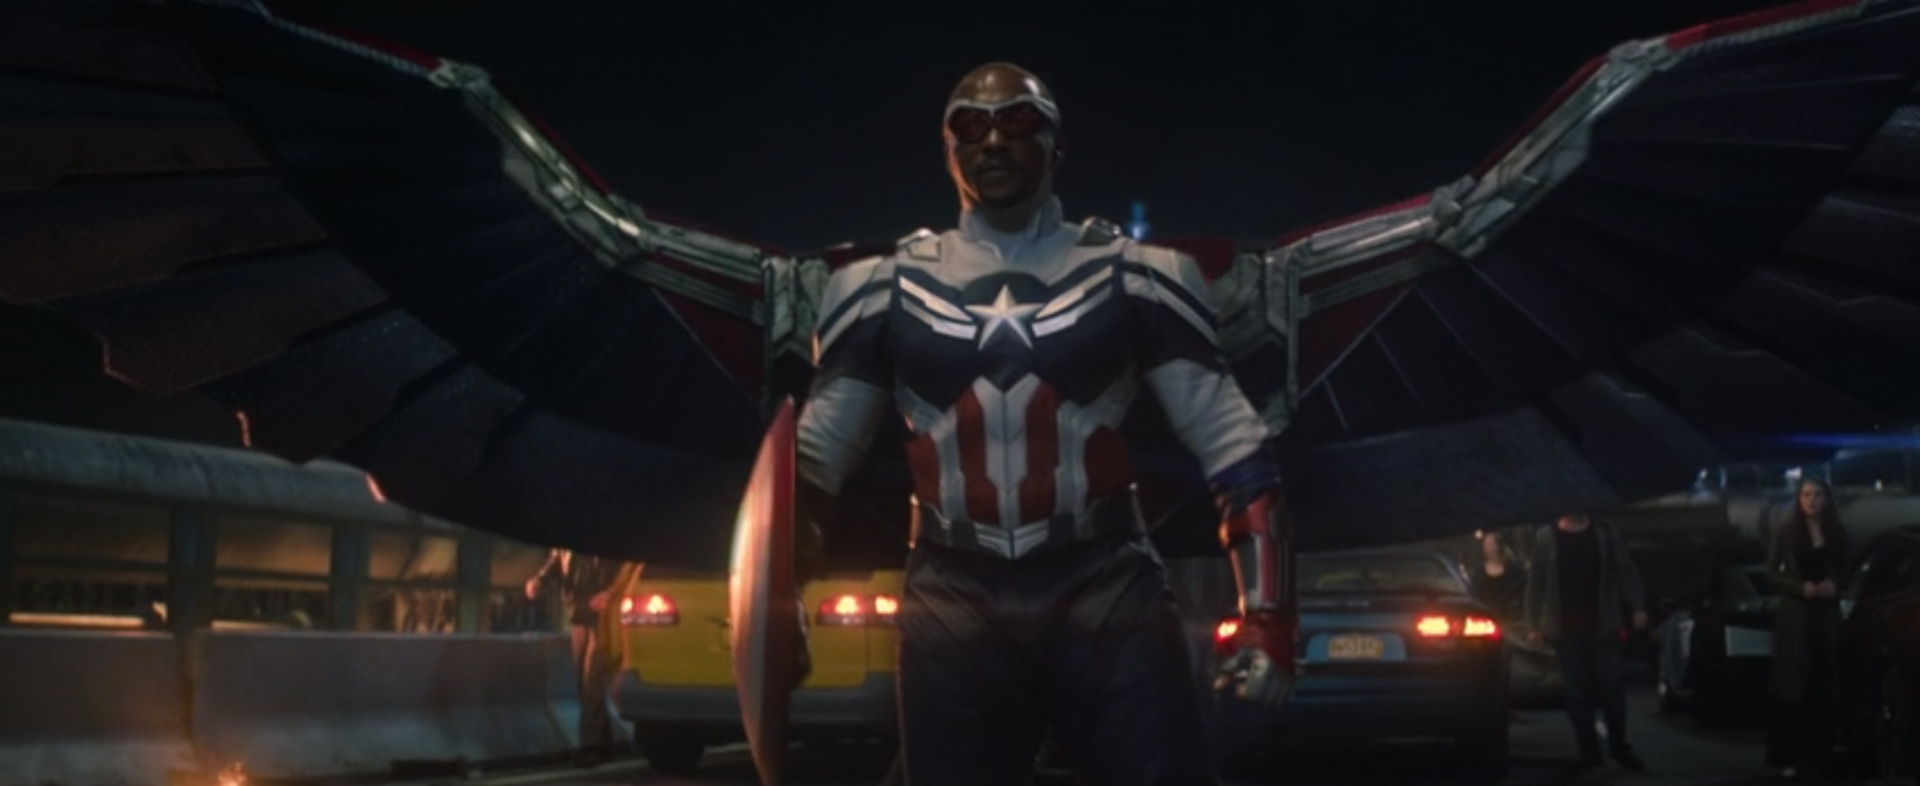 The Falcon and The Winter Soldier (Captain America and The Winter Soldier): One World, One People. Image Credit: Disney+.